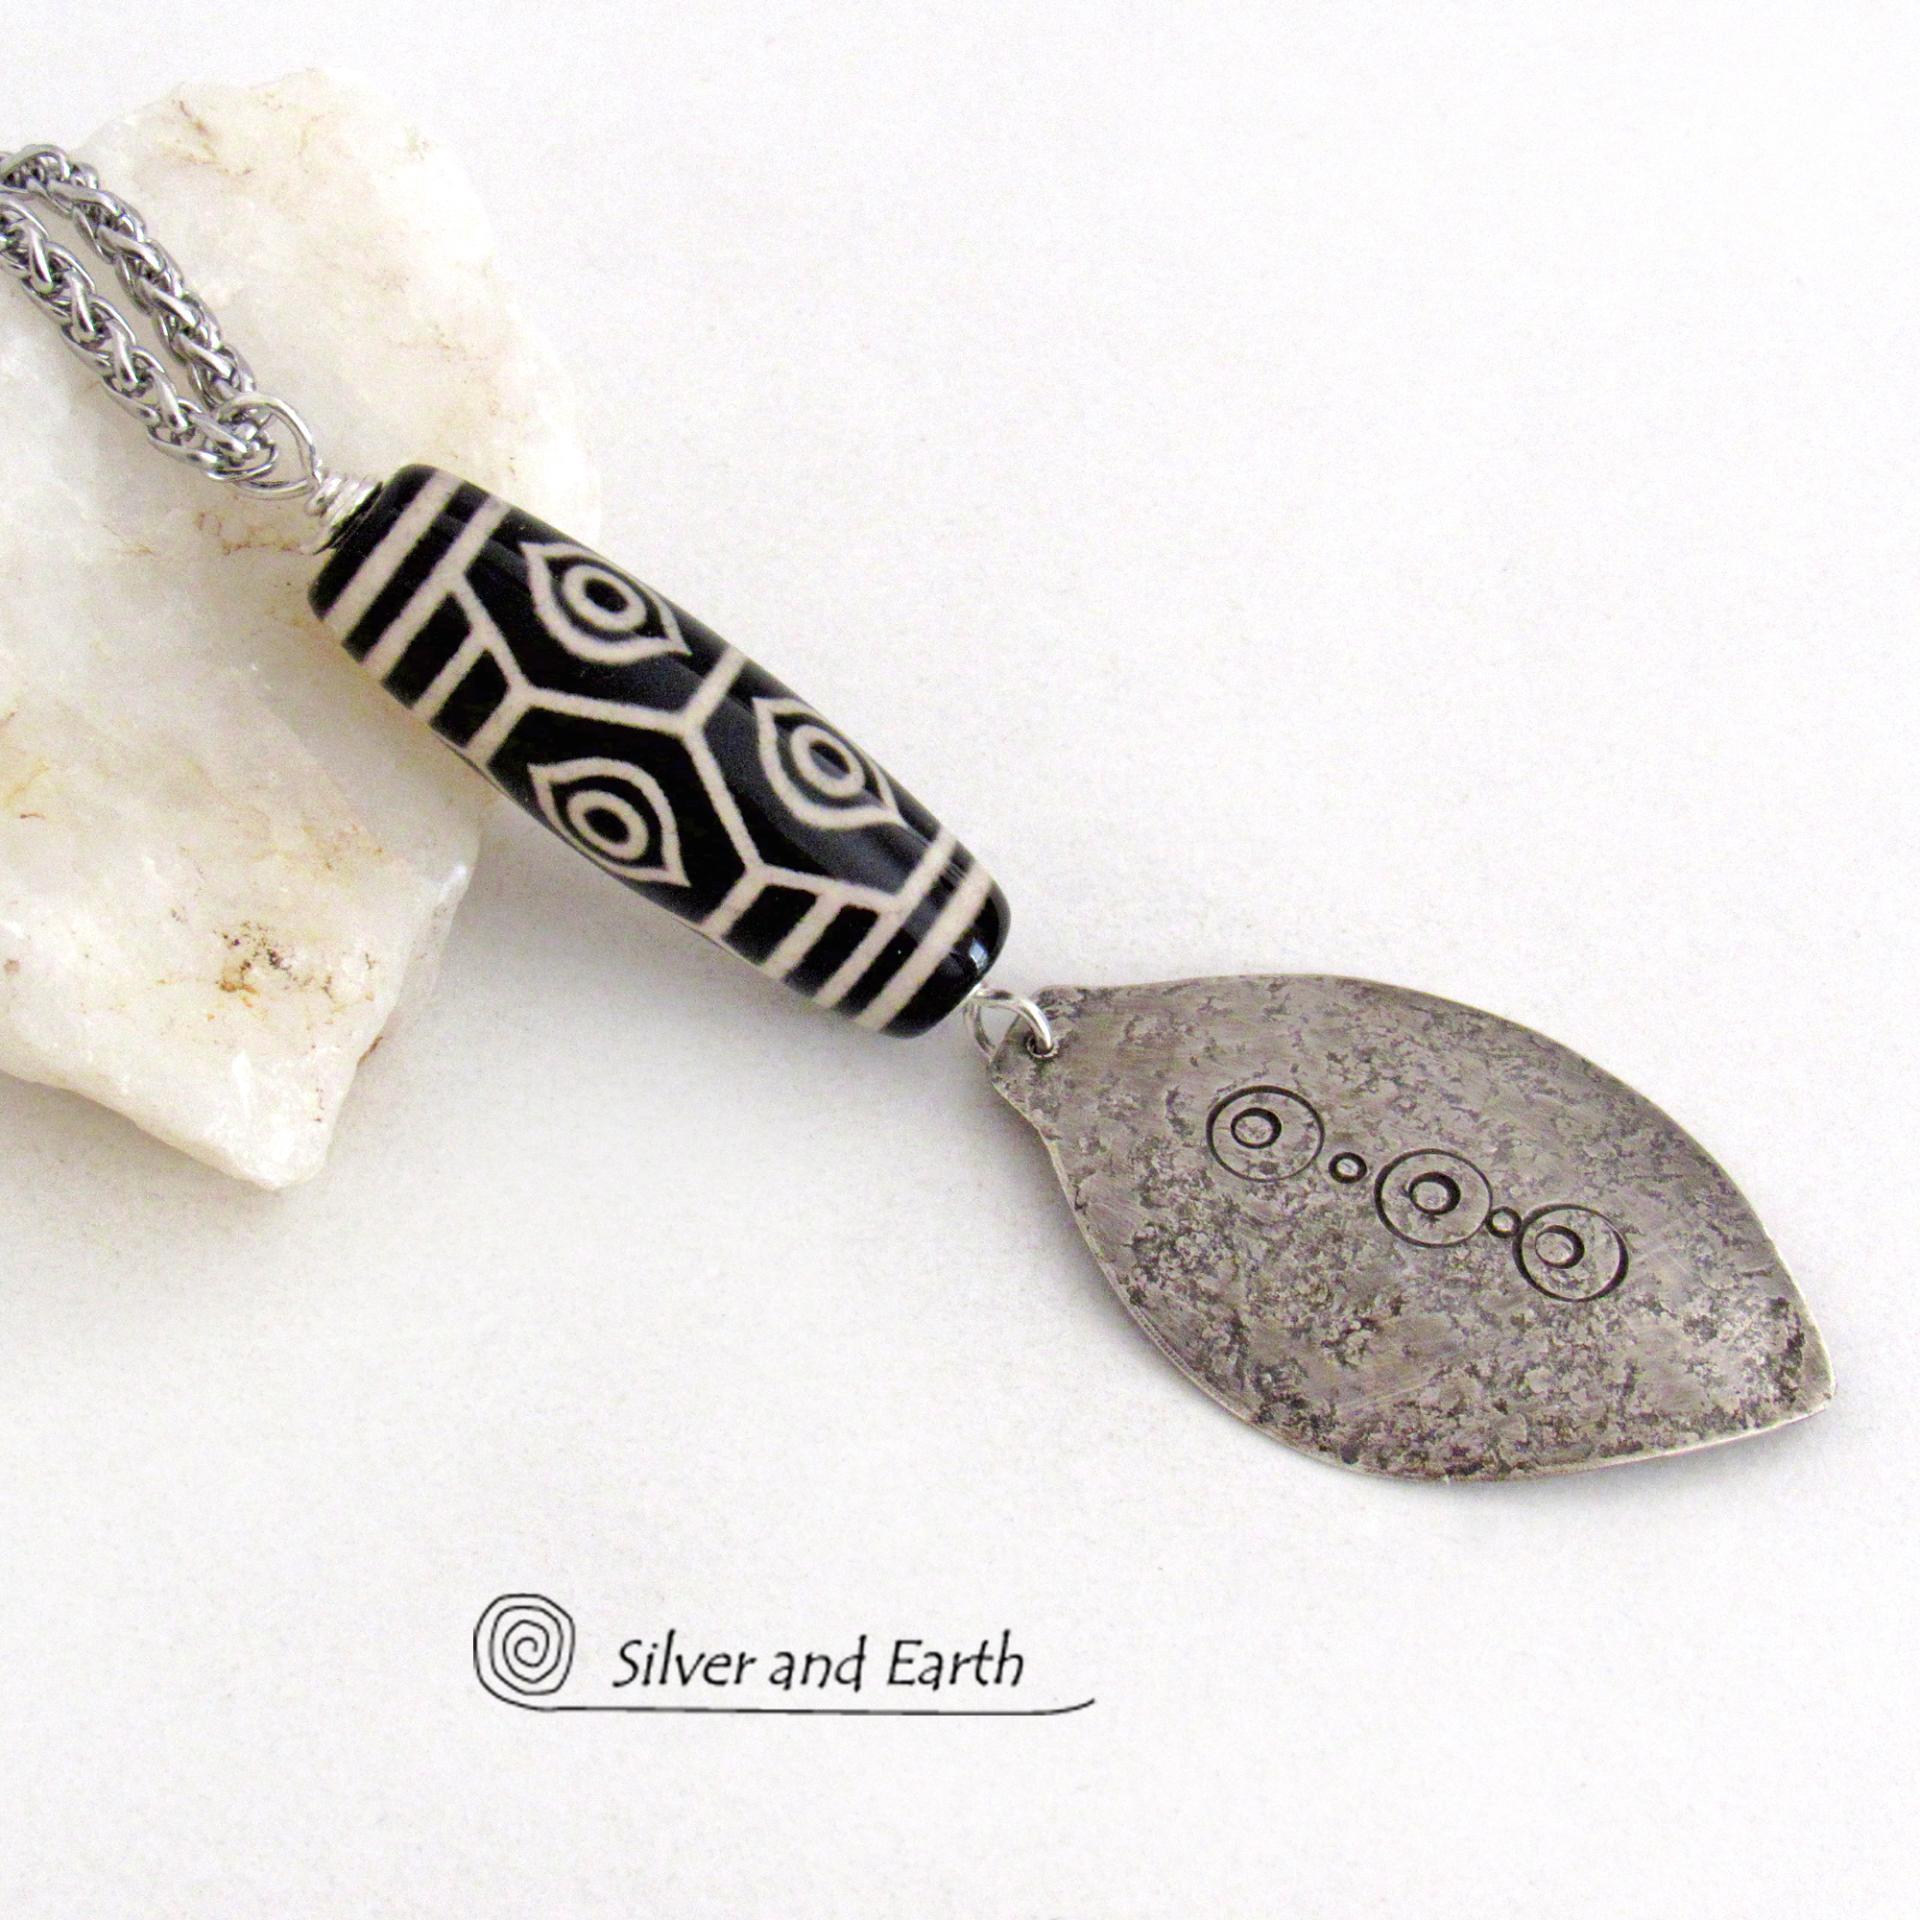 Black And White Tibetan Agate Sterling Silver Necklace - Bold Ethnic Bohemian Style Jewelry 